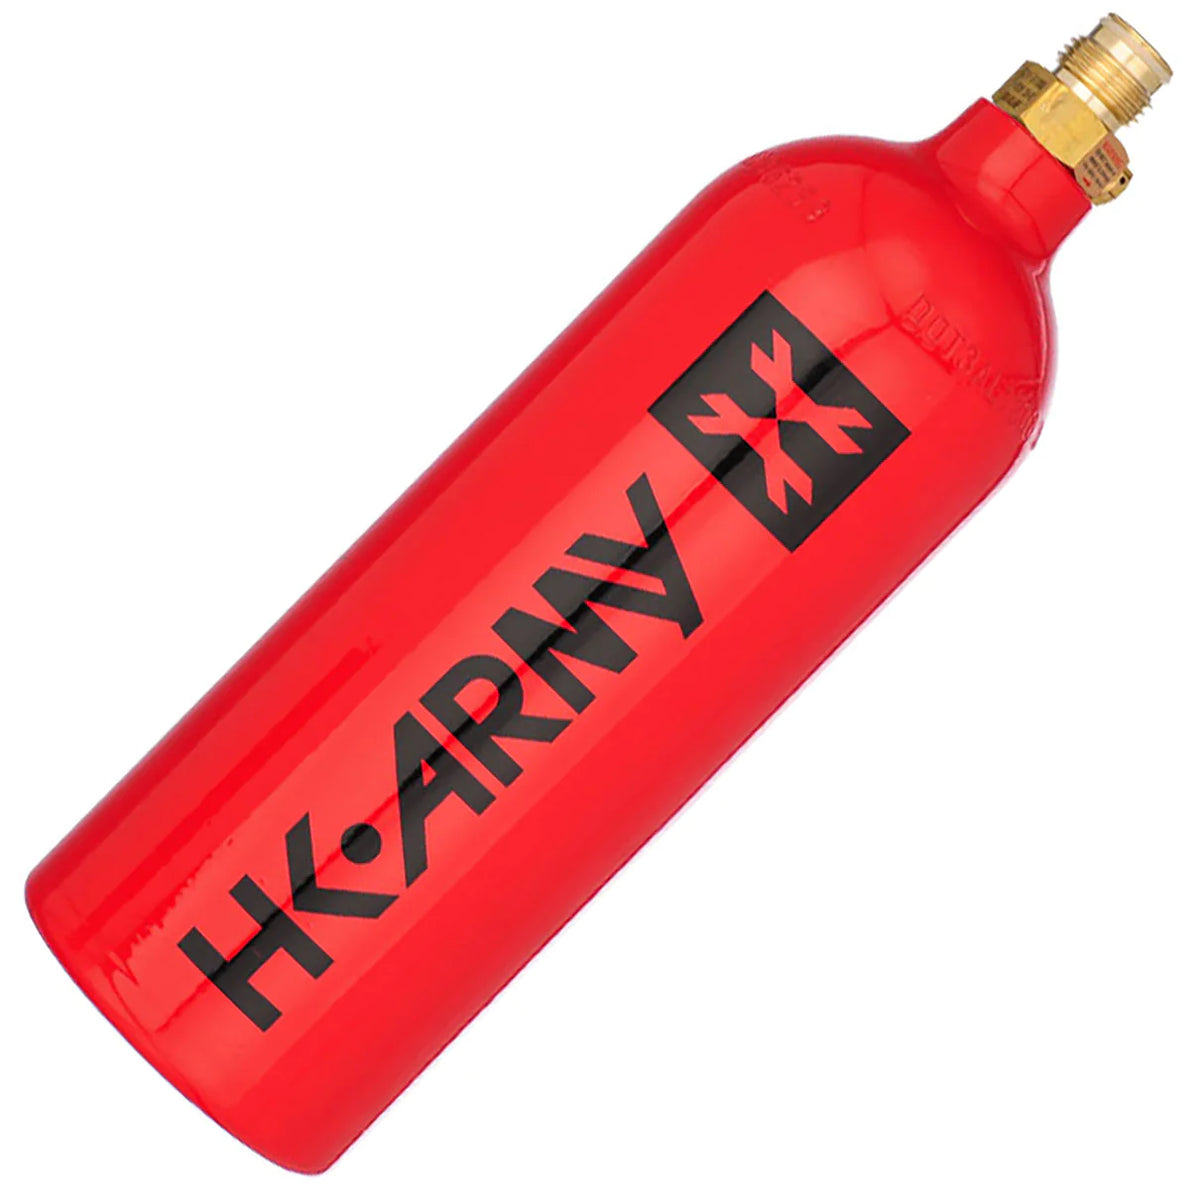 20Oz Paintball Co2 Tank - Red - HK Army